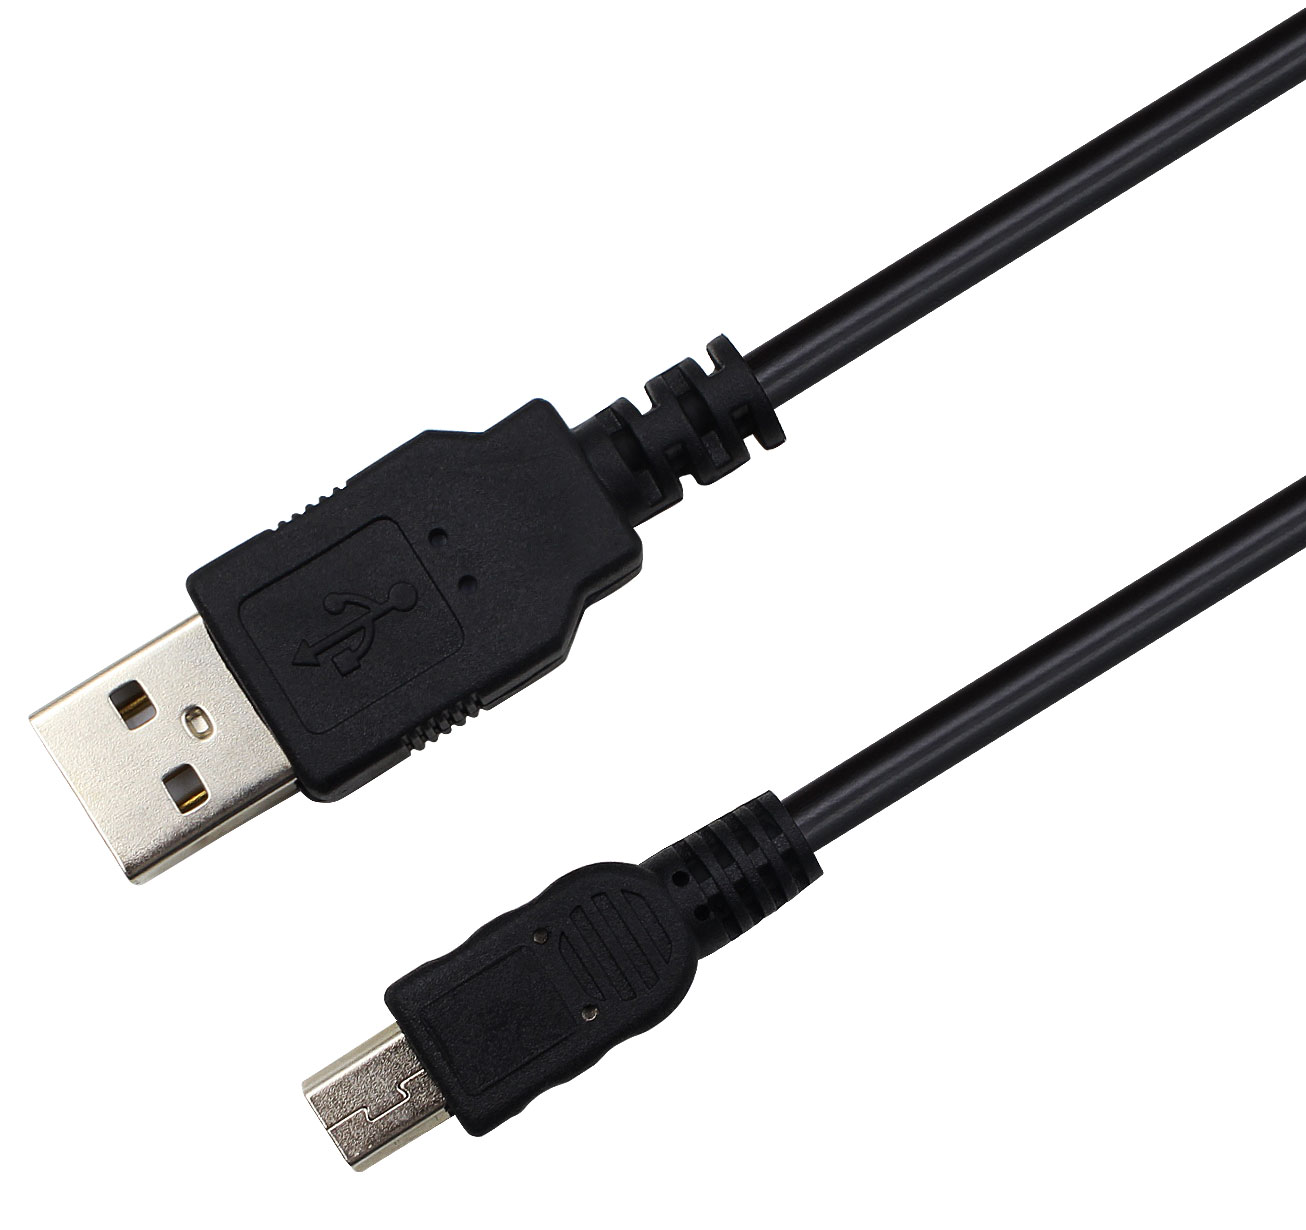 USB DATA SYNC TRANSFER-KABEL VOOR ELGATO GAME CAPTURE HD PVR RECORDER MAC PC